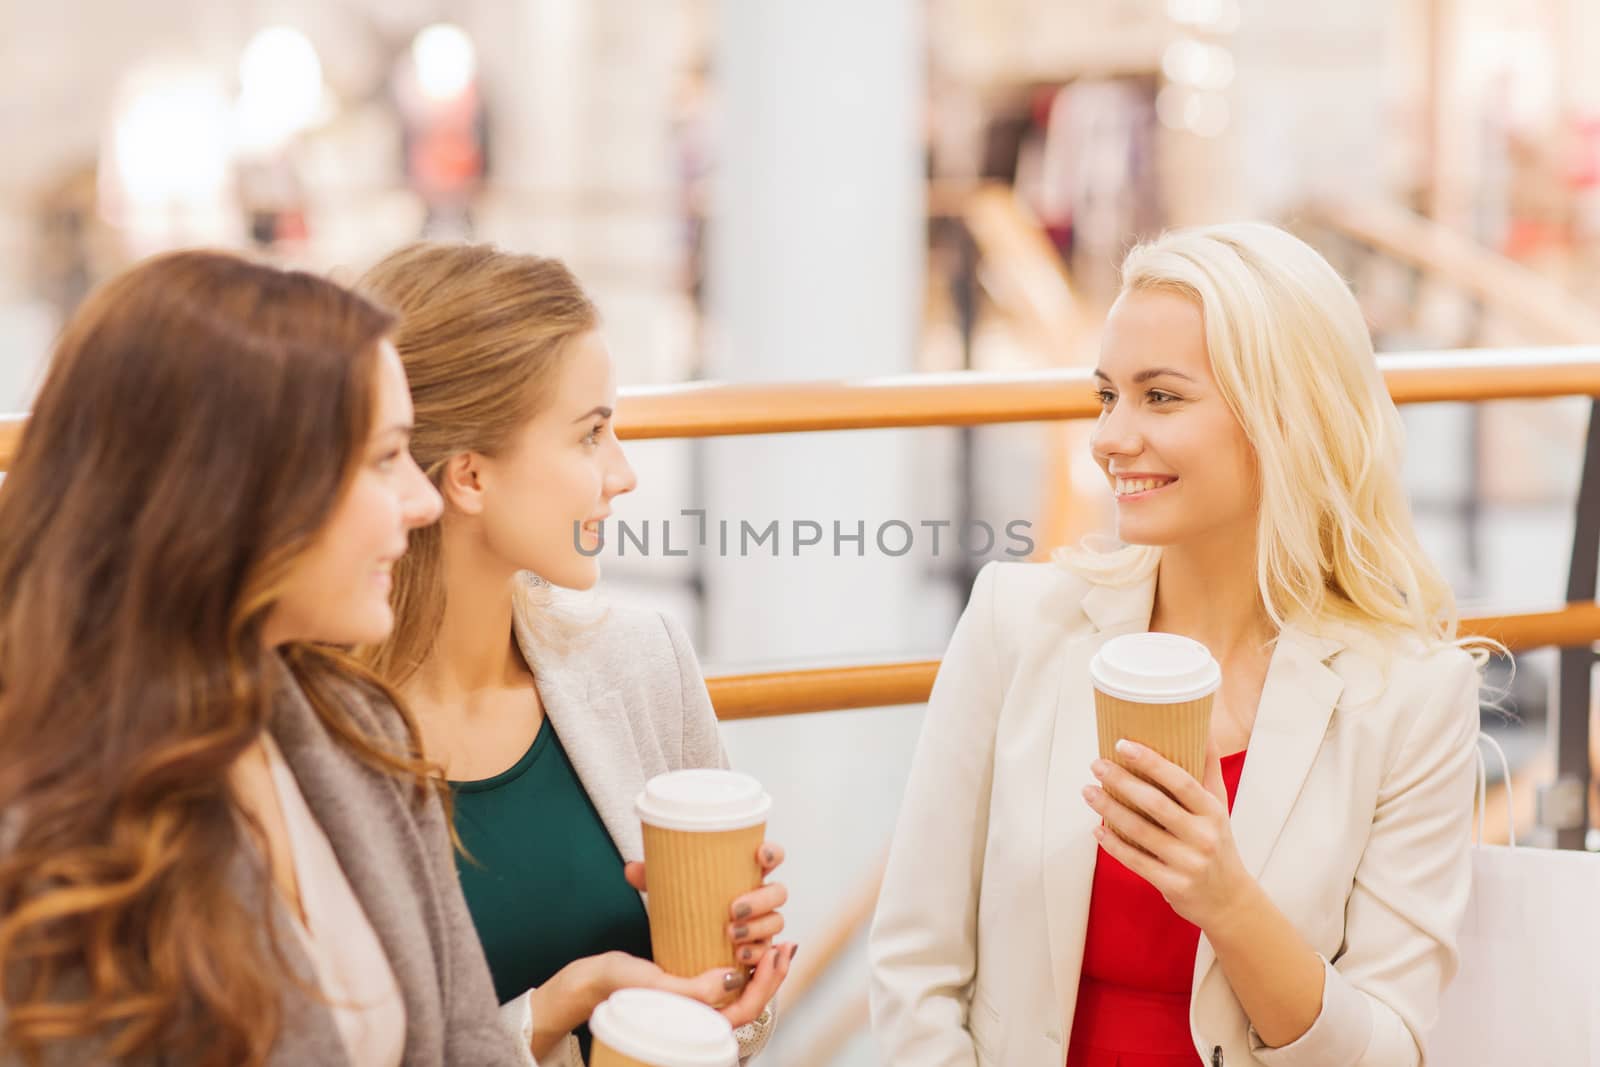 sale, consumerism and people concept - happy young women with shopping bags and coffee paper cups in mall